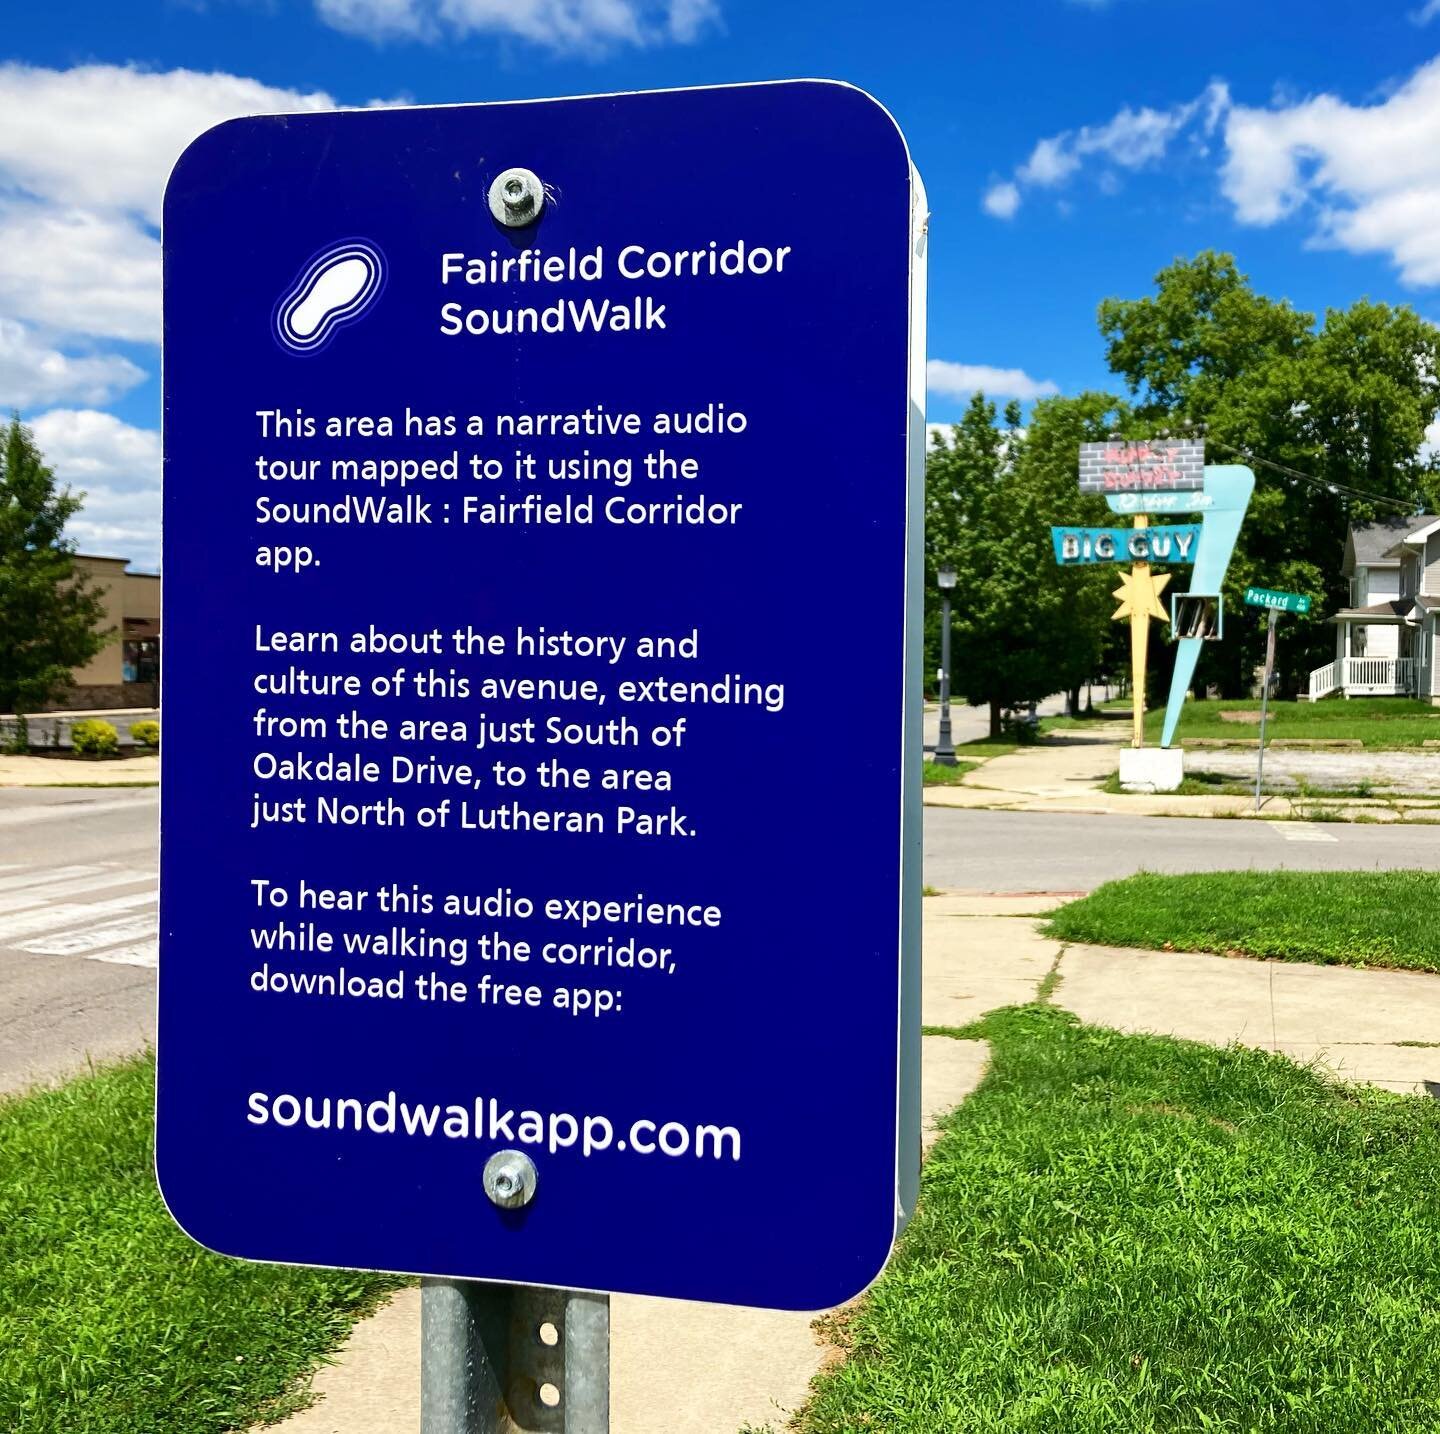 The @fortwayneparks department has graciously added a sign pointing visitors the area&rsquo;s SoundWalk at the sidewalk of Packard Park!

Go take a walk with the app or download it for free to experience from wherever you&rsquo;d like!
#dtfw #fortway